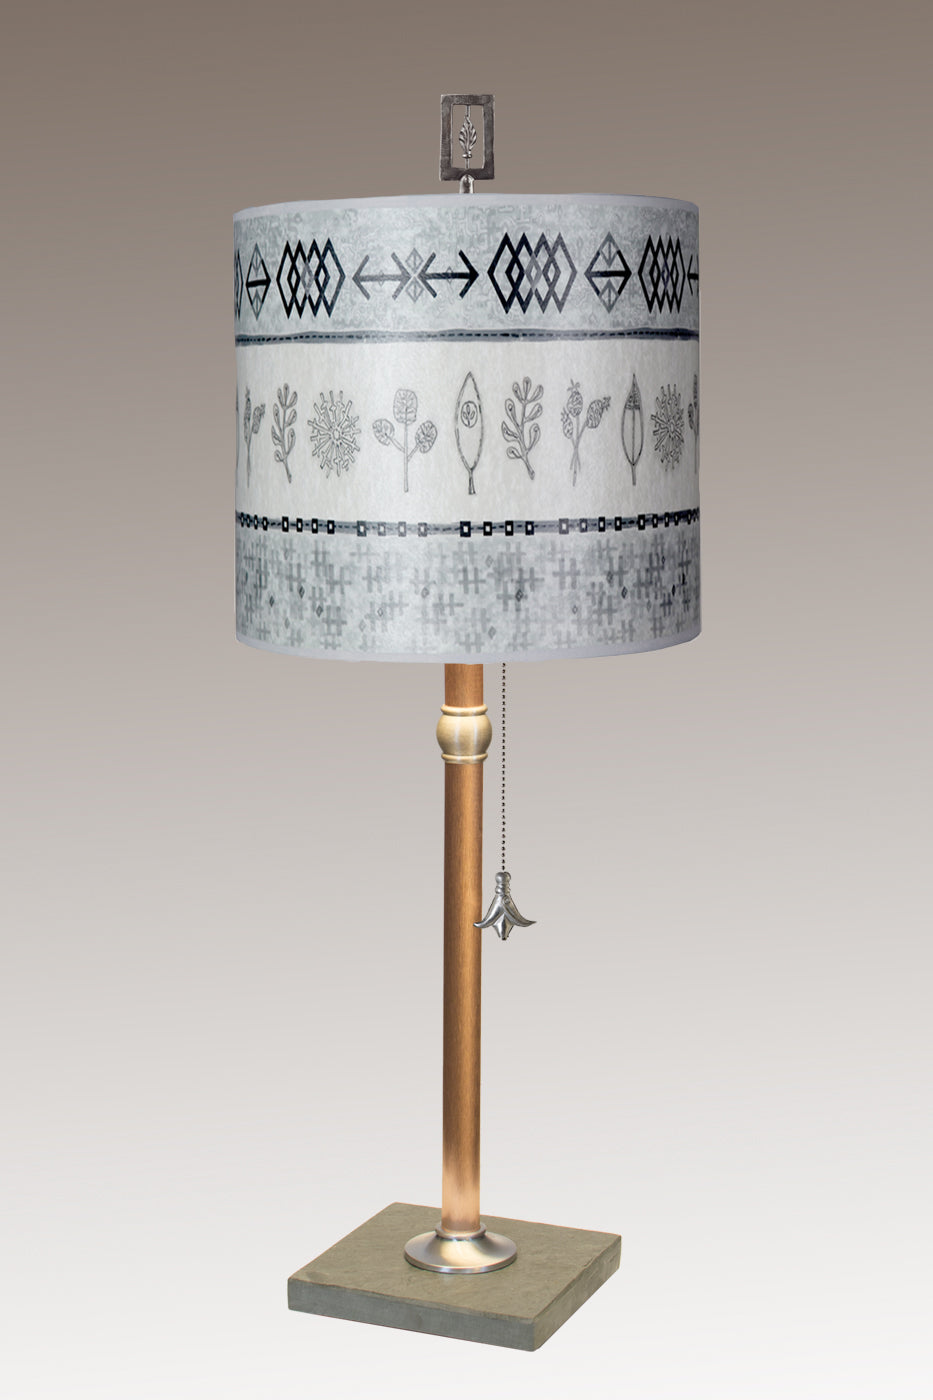 Janna Ugone & Co Table Lamps Copper Table Lamp with Medium Drum Shade in Woven & Sprig in Mist